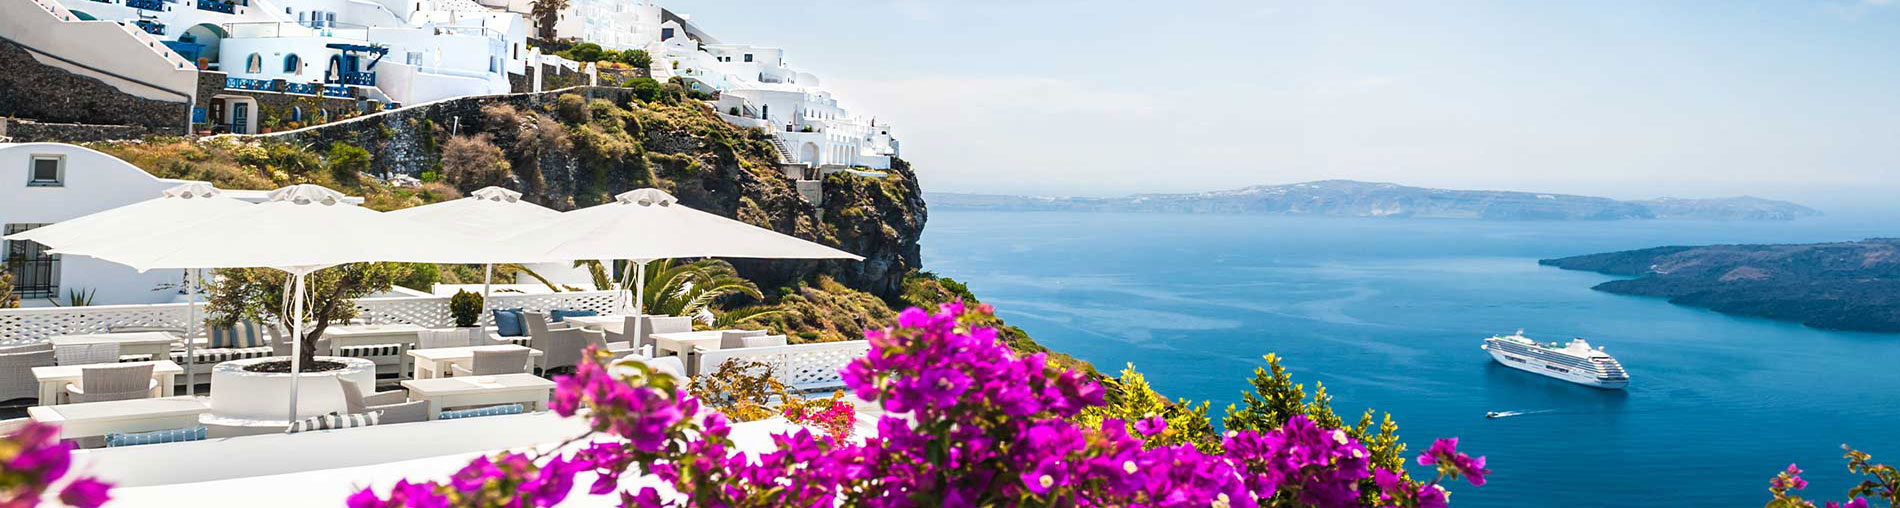 Greece Cruise Holiday Package - 6 Nights